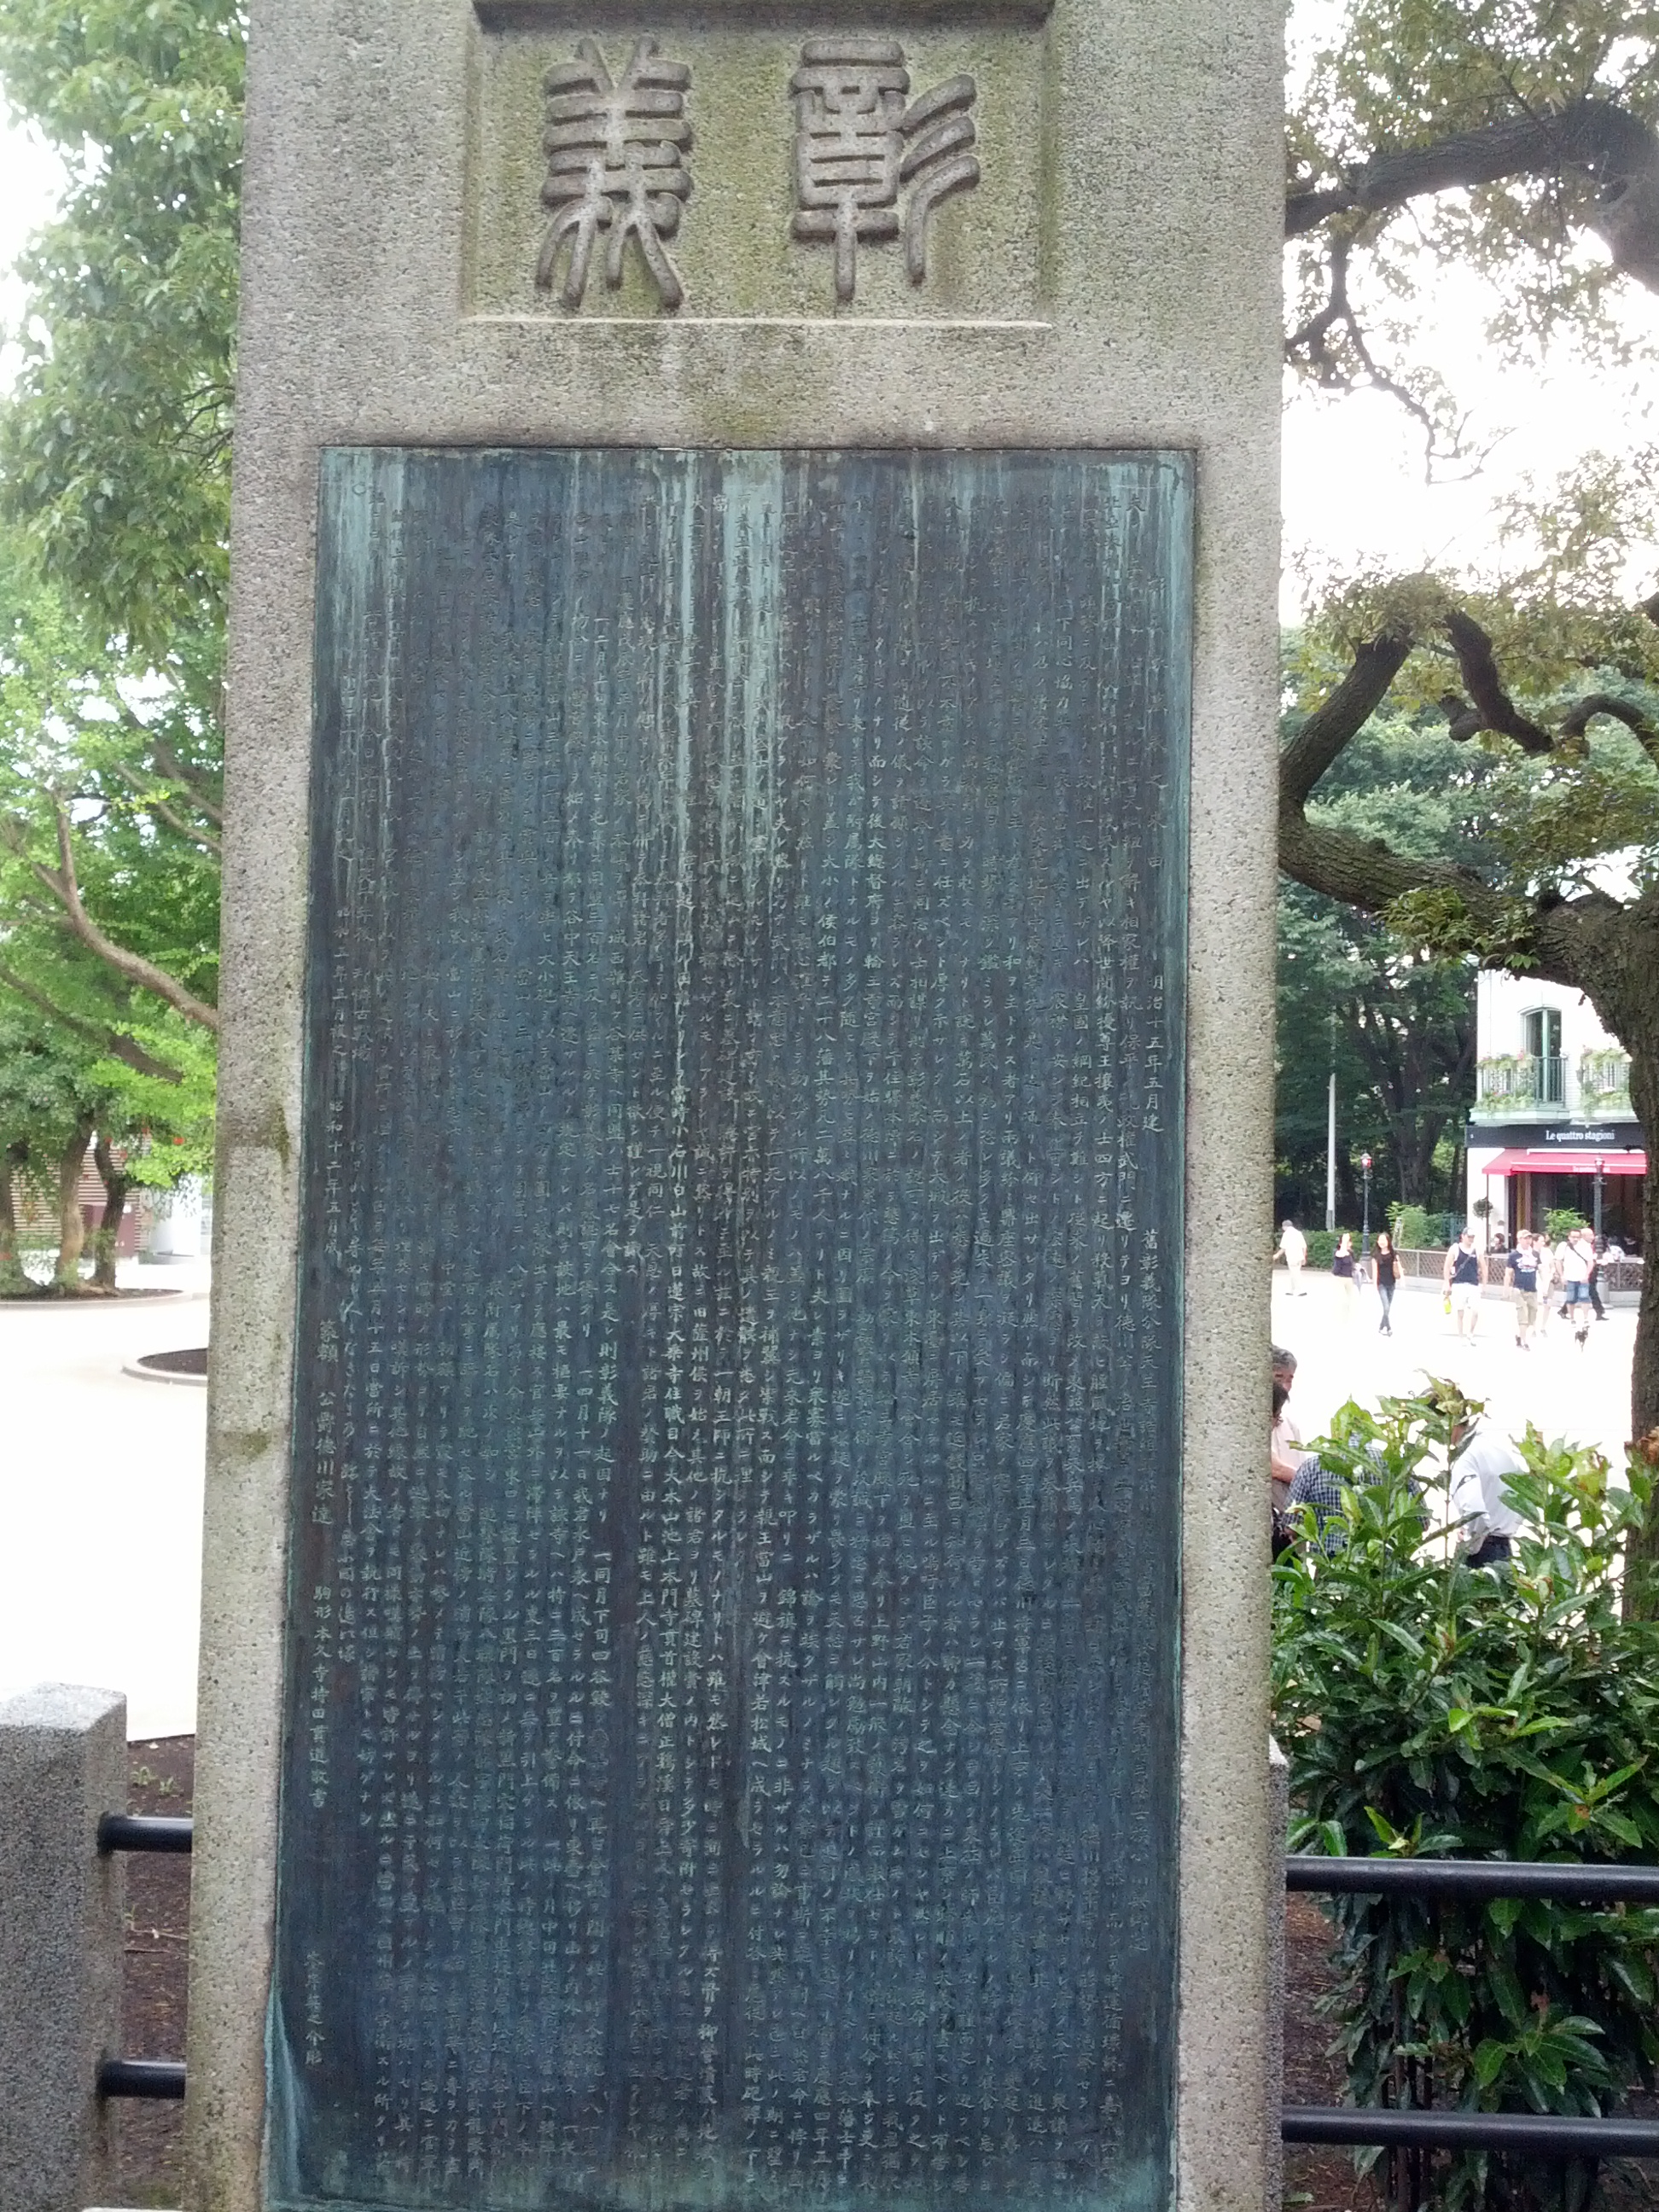 Part of a monument to the Shogitai erected by the surviving members of the group with the permission of the new government.